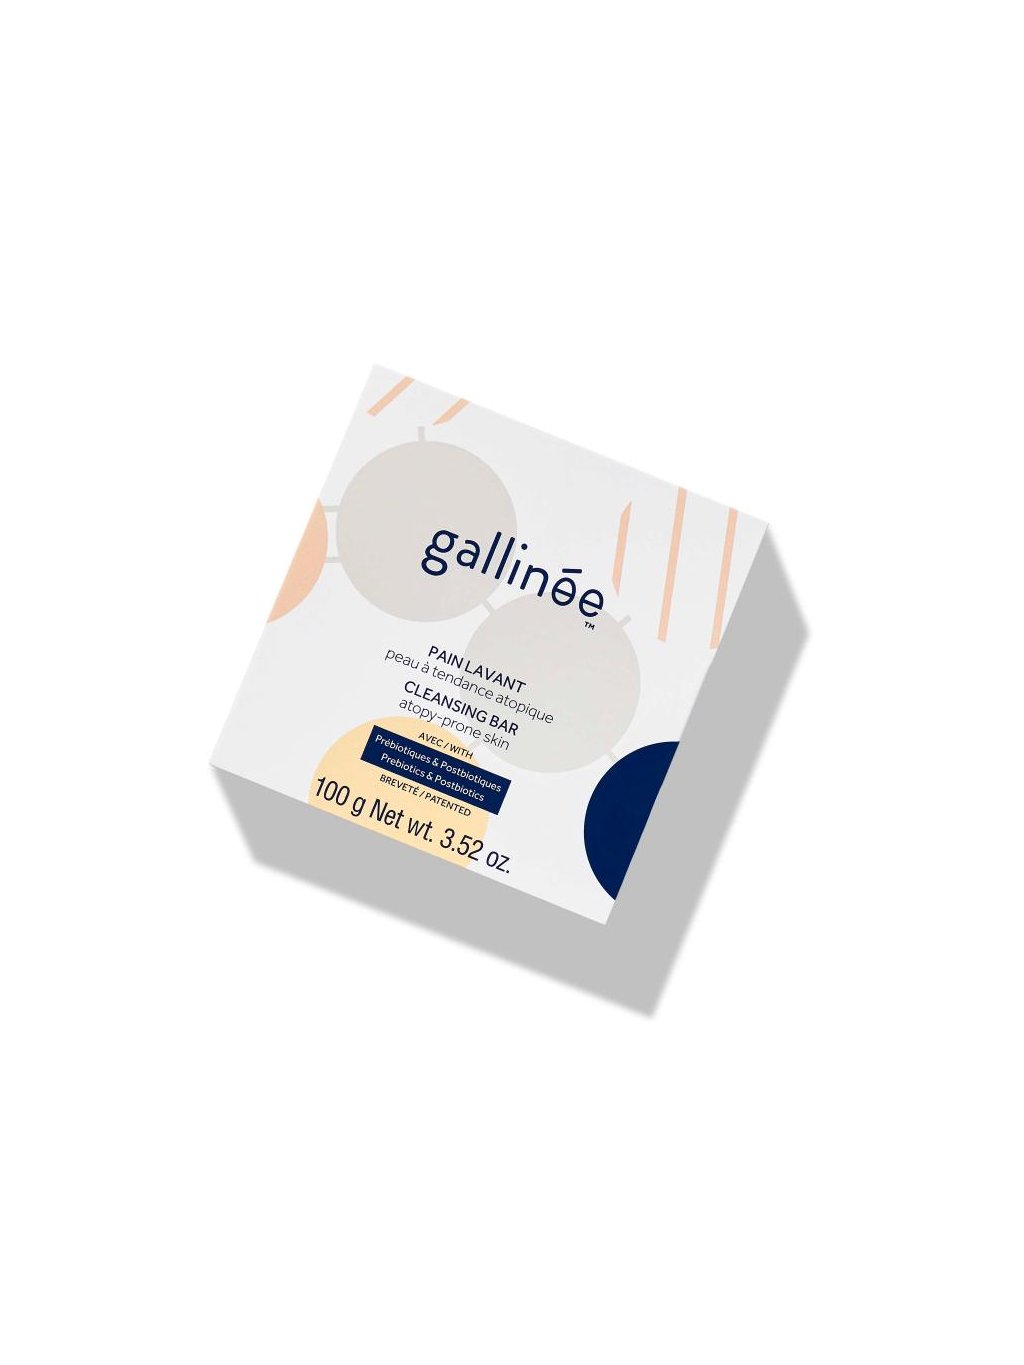 Gallinée Cleansing bar  suitable for atopics and allergies